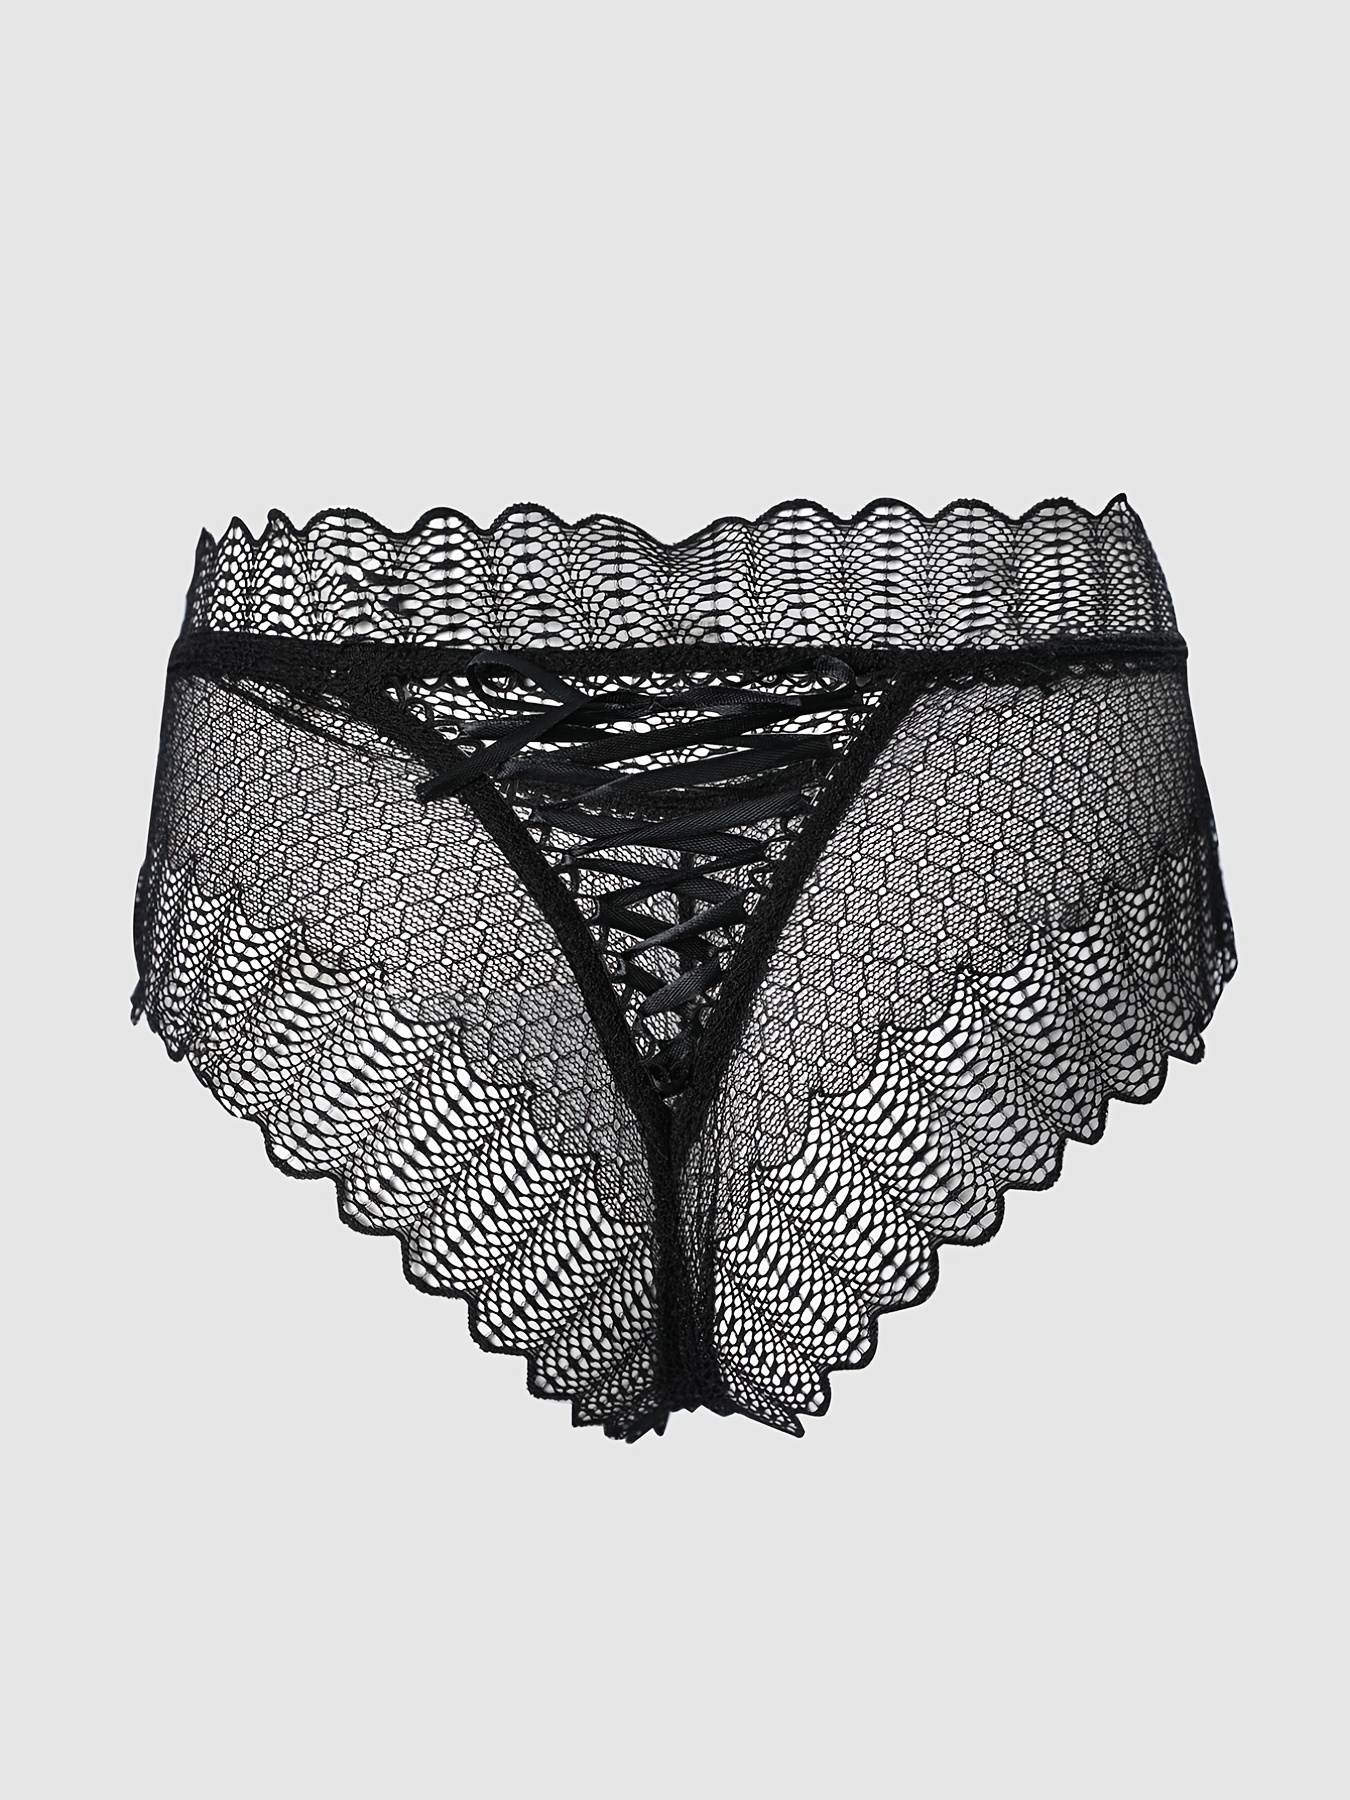 New Hot Panties For Women Crochet Lace Lace Up Panty Sexy Hollow Out  Underwear